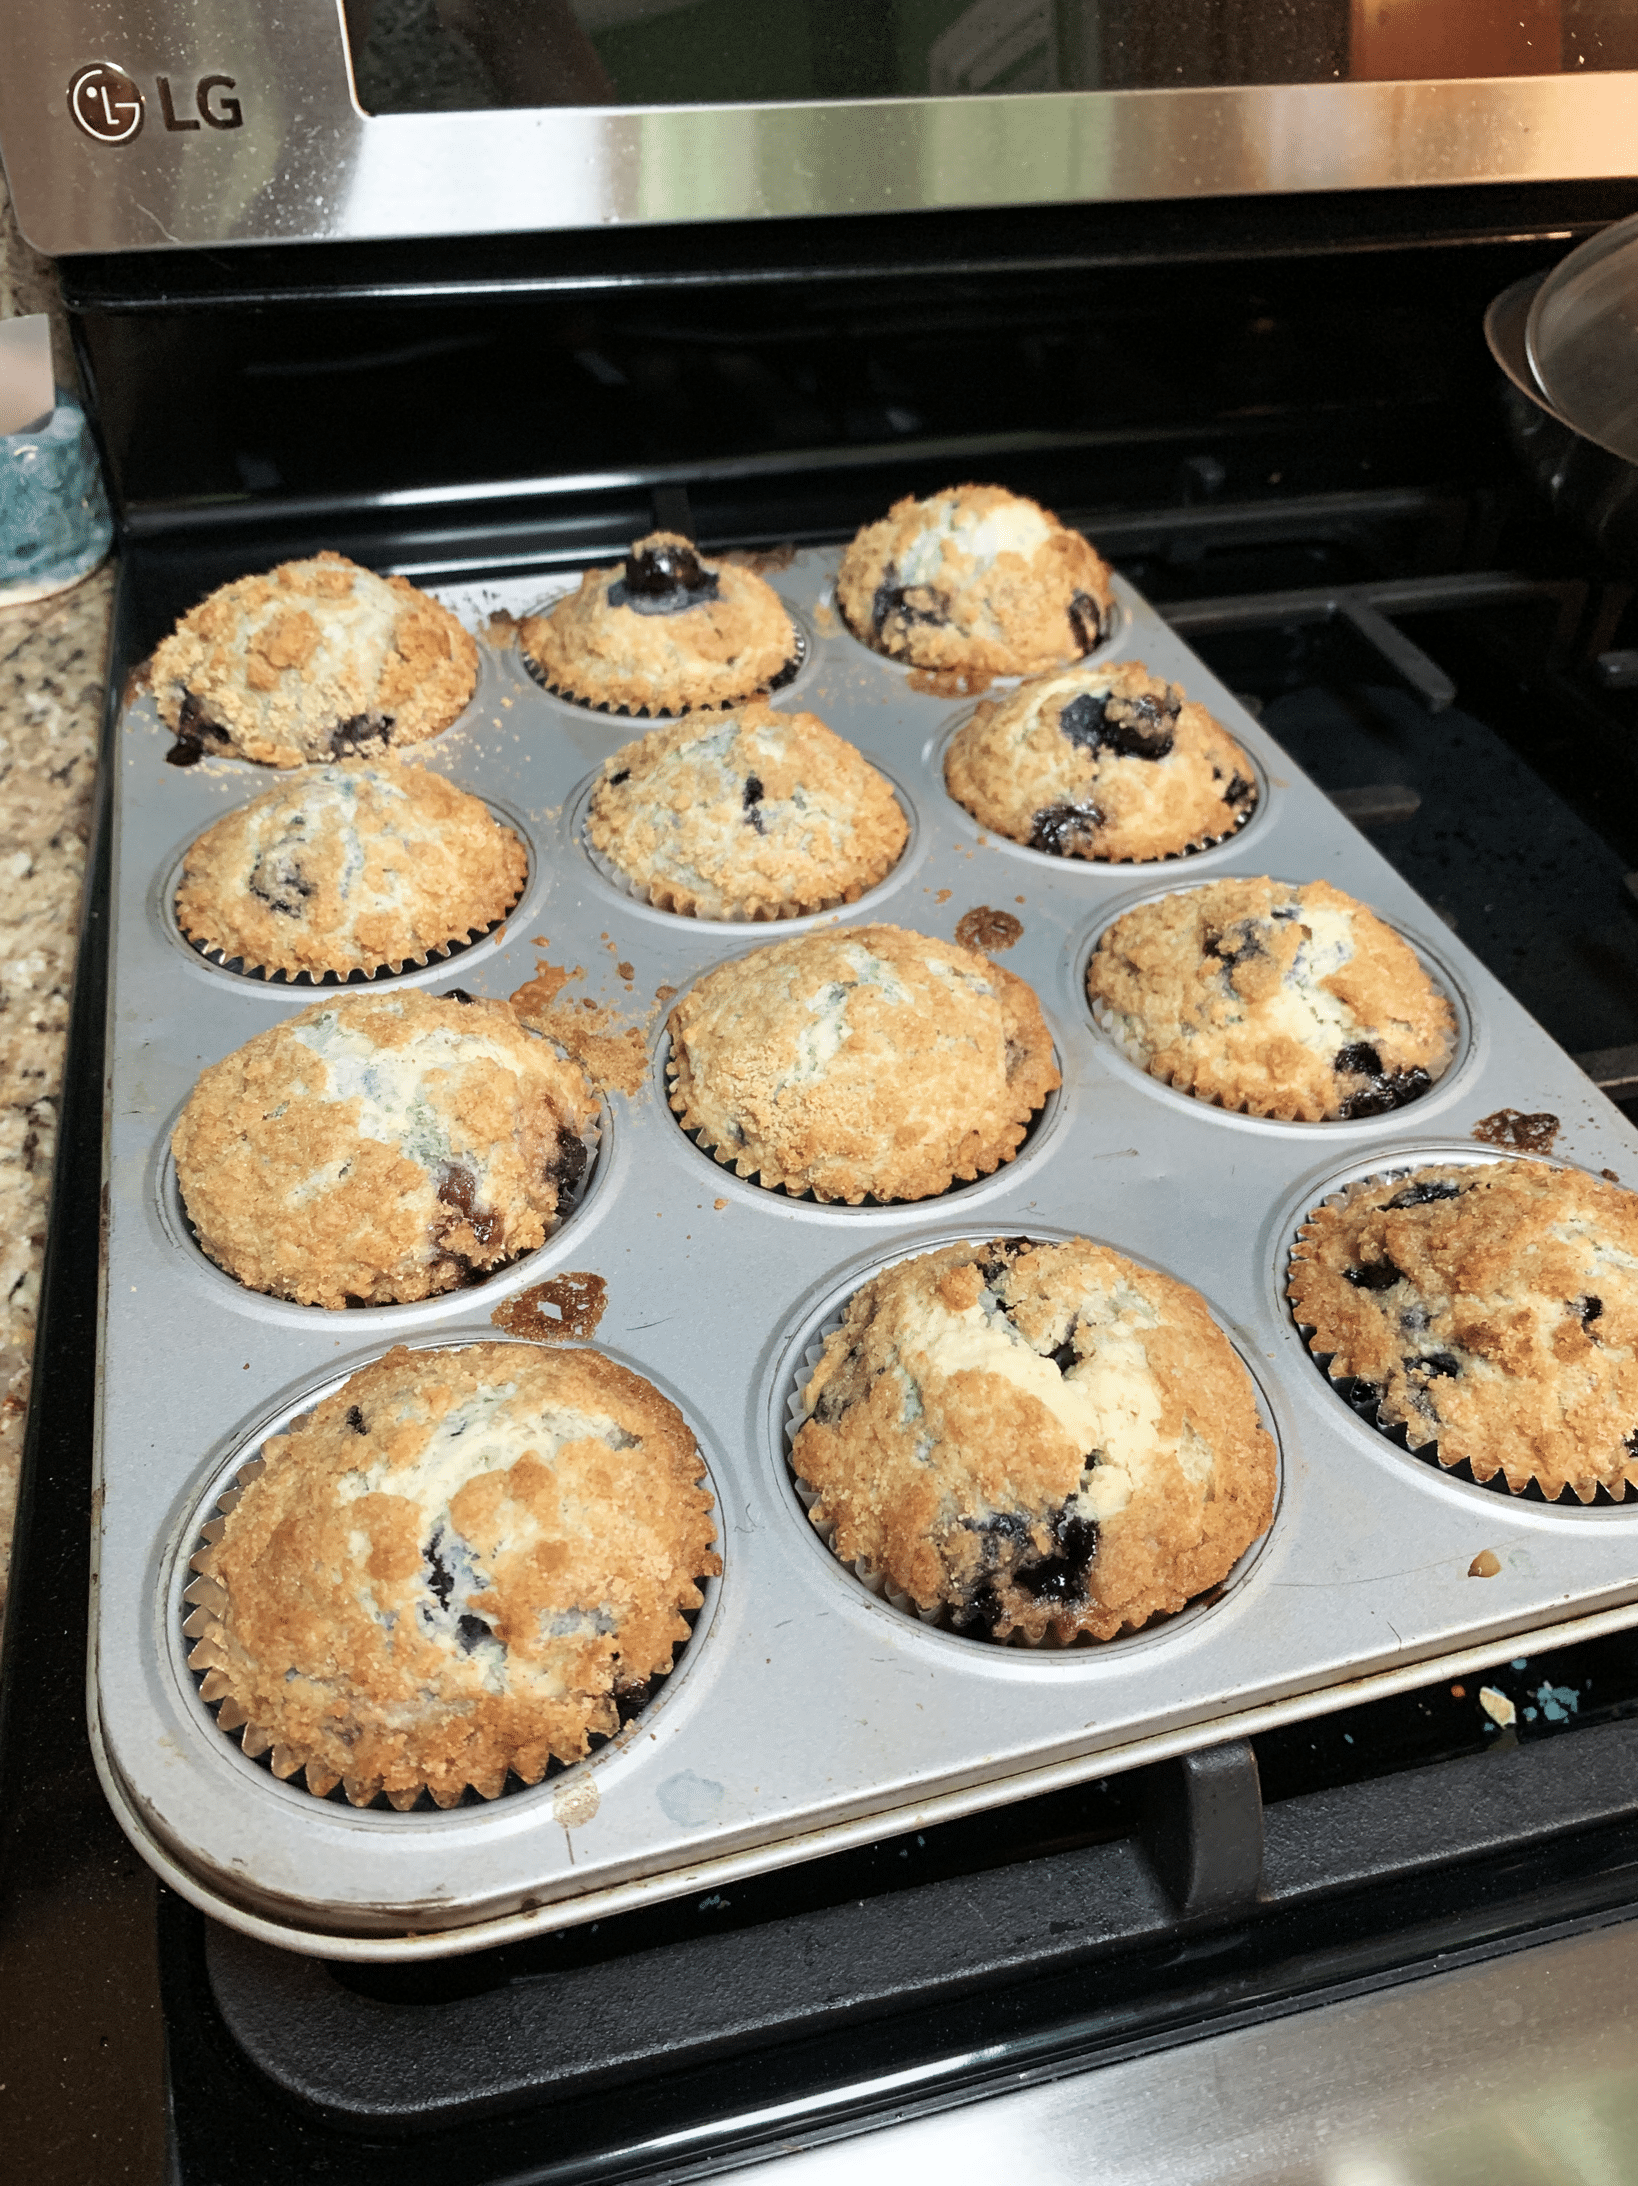 Finished blueberry muffins